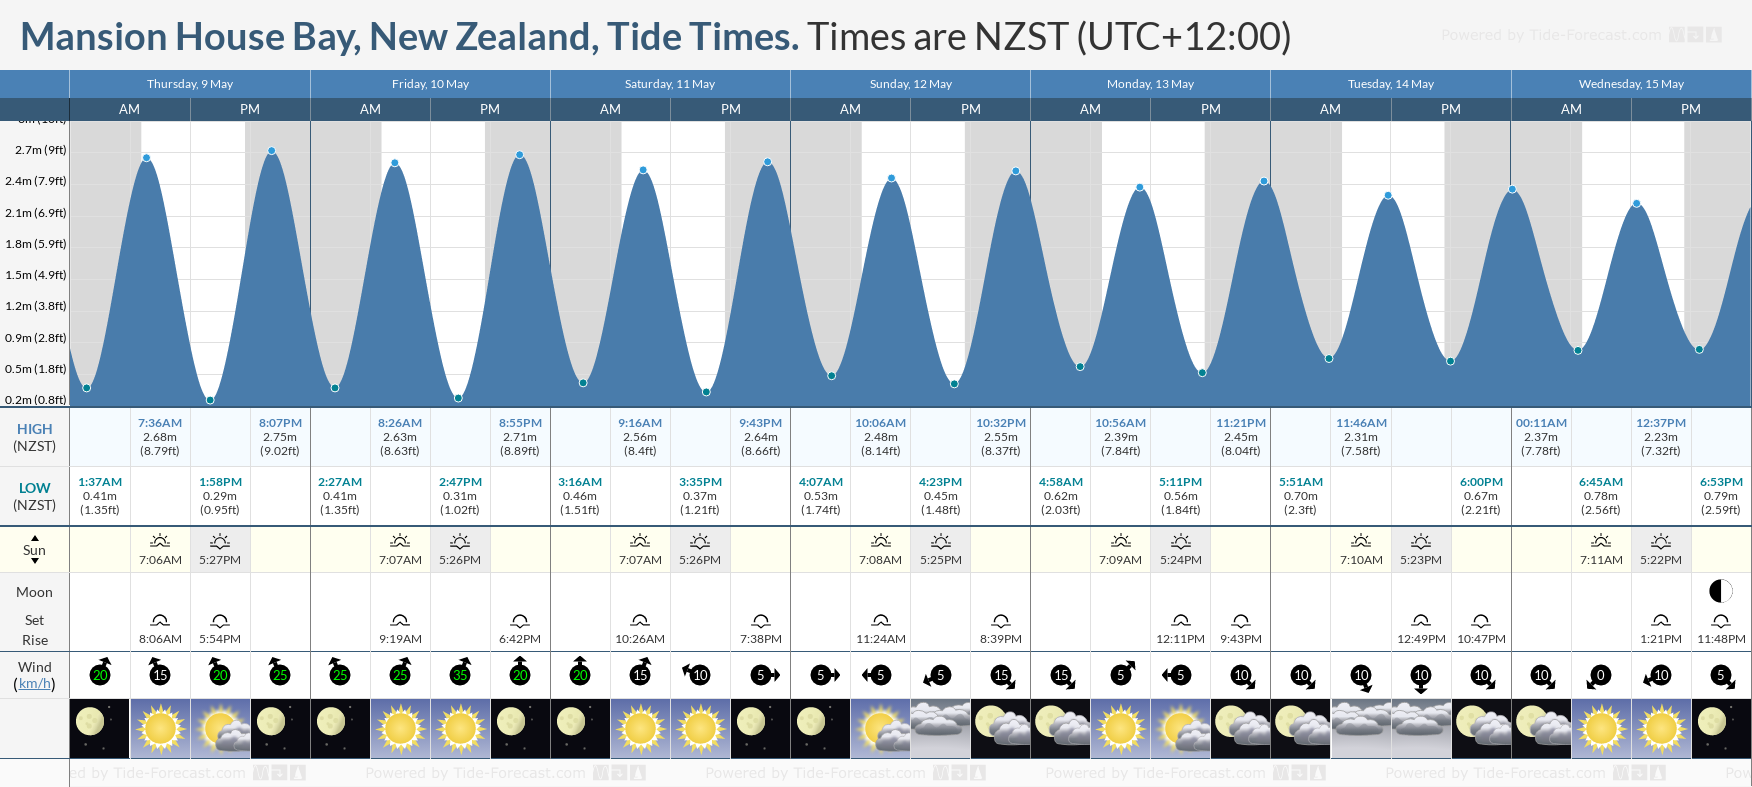 Mansion House Bay, New Zealand Tide Chart including high and low tide tide times for the next 7 days